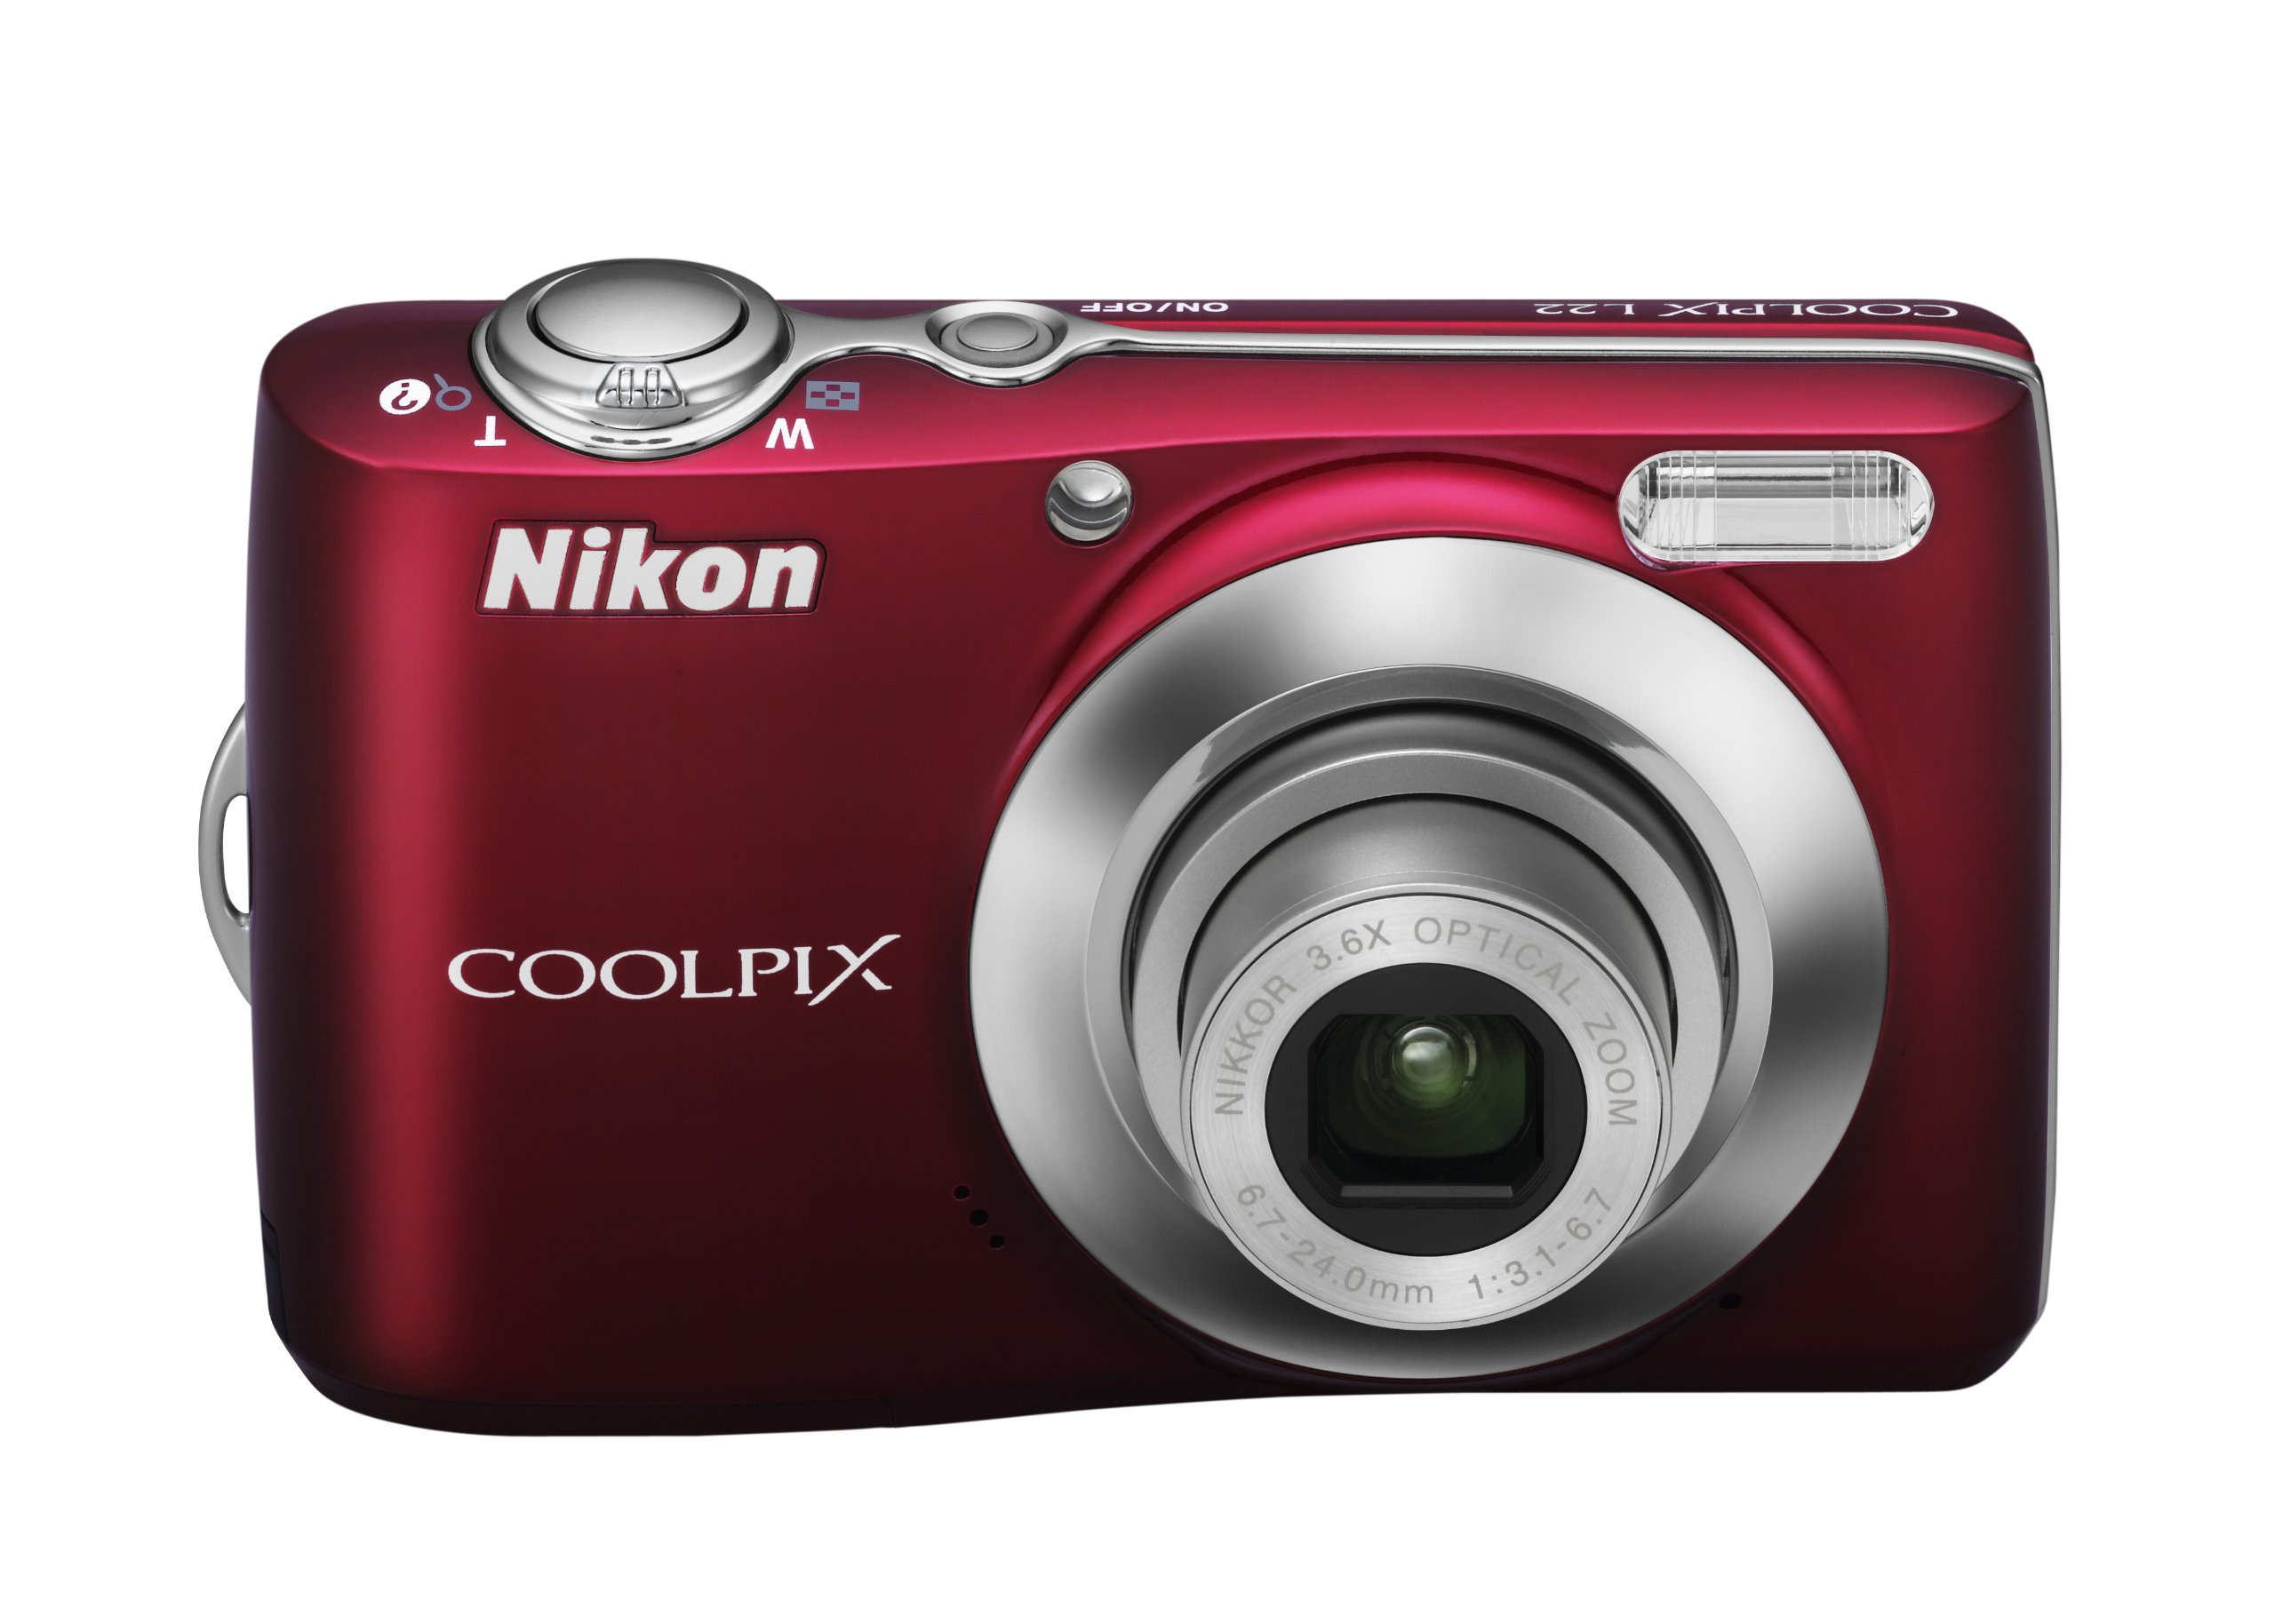 Nikon Coolpix L22 12.0MP Digital Camera with 3.6x Optical Zoom and 3.0-Inch LCD (Red-primary)